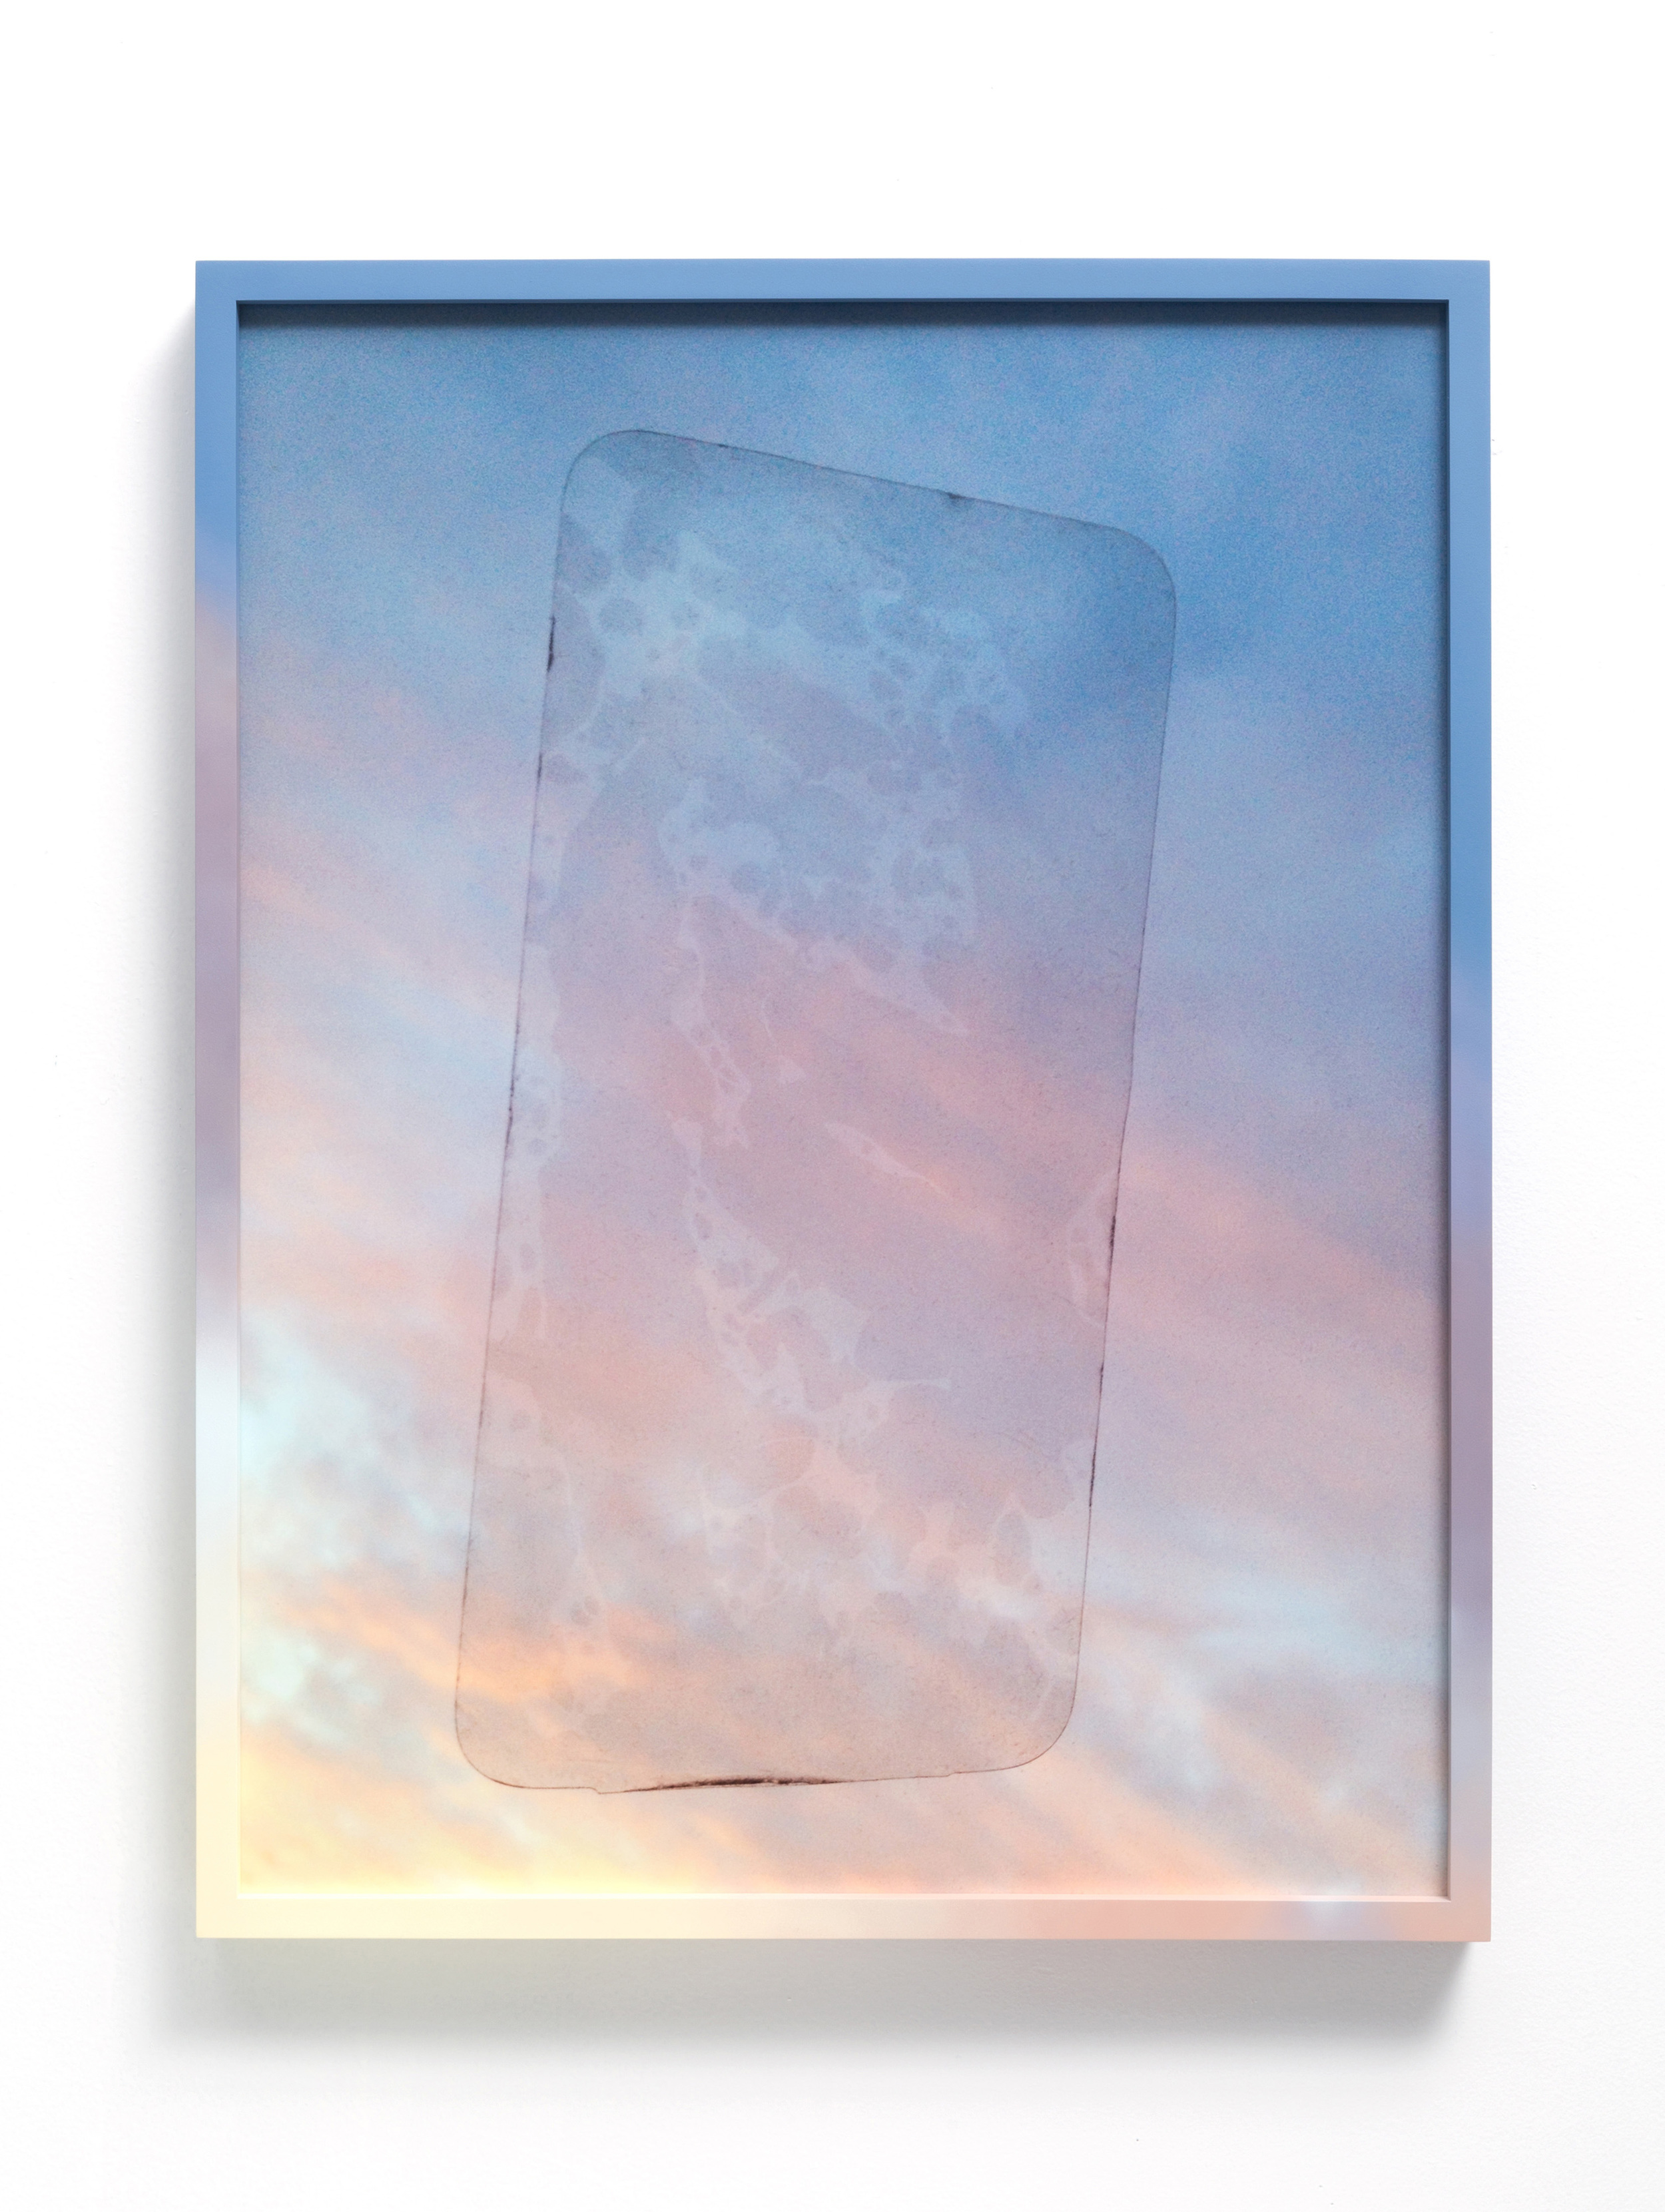   IMG 7036_2/8/14, 5:37:37 PM , 2014 Film lamination, archival pigment print, sintra, airbrushed acrylic, and wood frame 23 1/2 x 30 1/2 x 2 in (60 x 78 x 5 cm) 